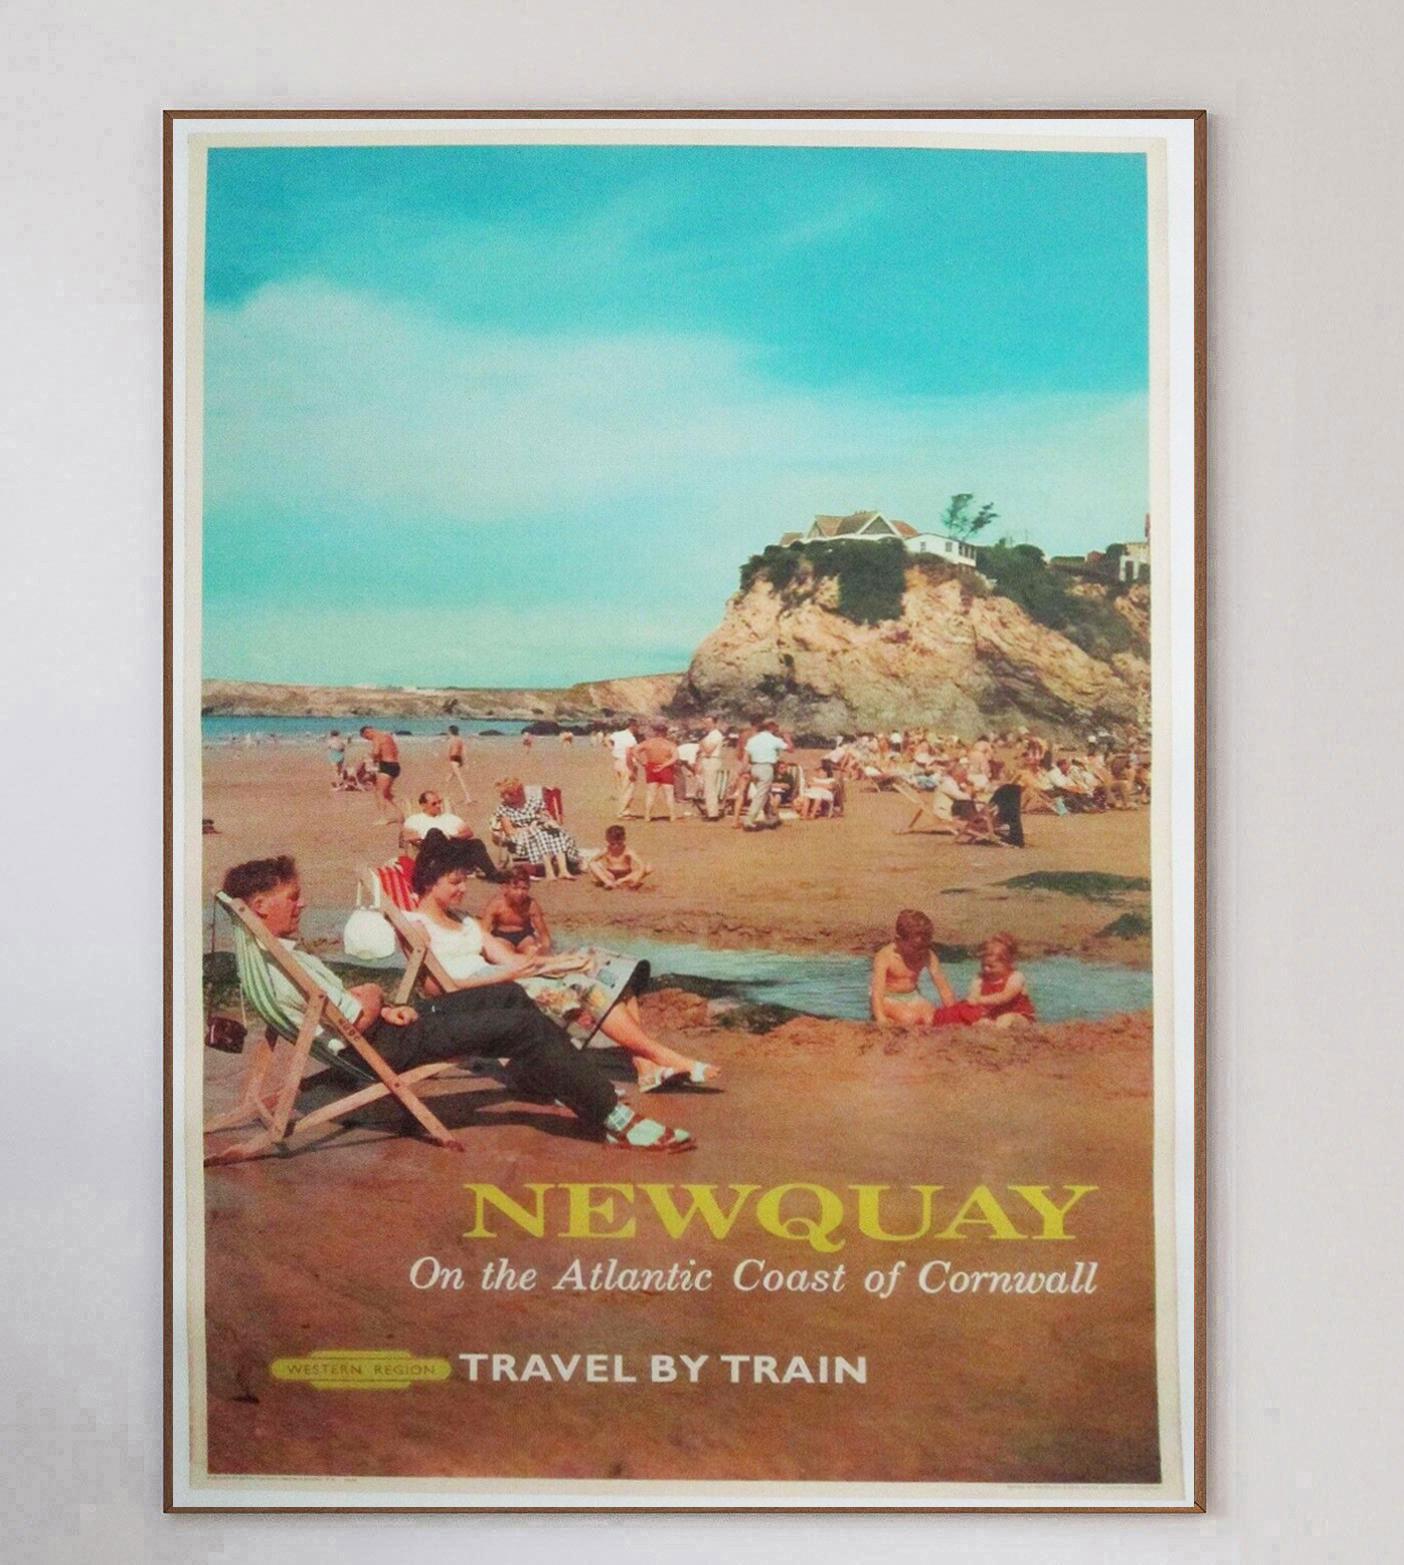 Wonderful rare poster from 1962, produced by British Railway to promote Western Region routes to Newquay in Cornwall, England. With a wonderful image families enjoying the beautiful beaches of the area, the piece reads 